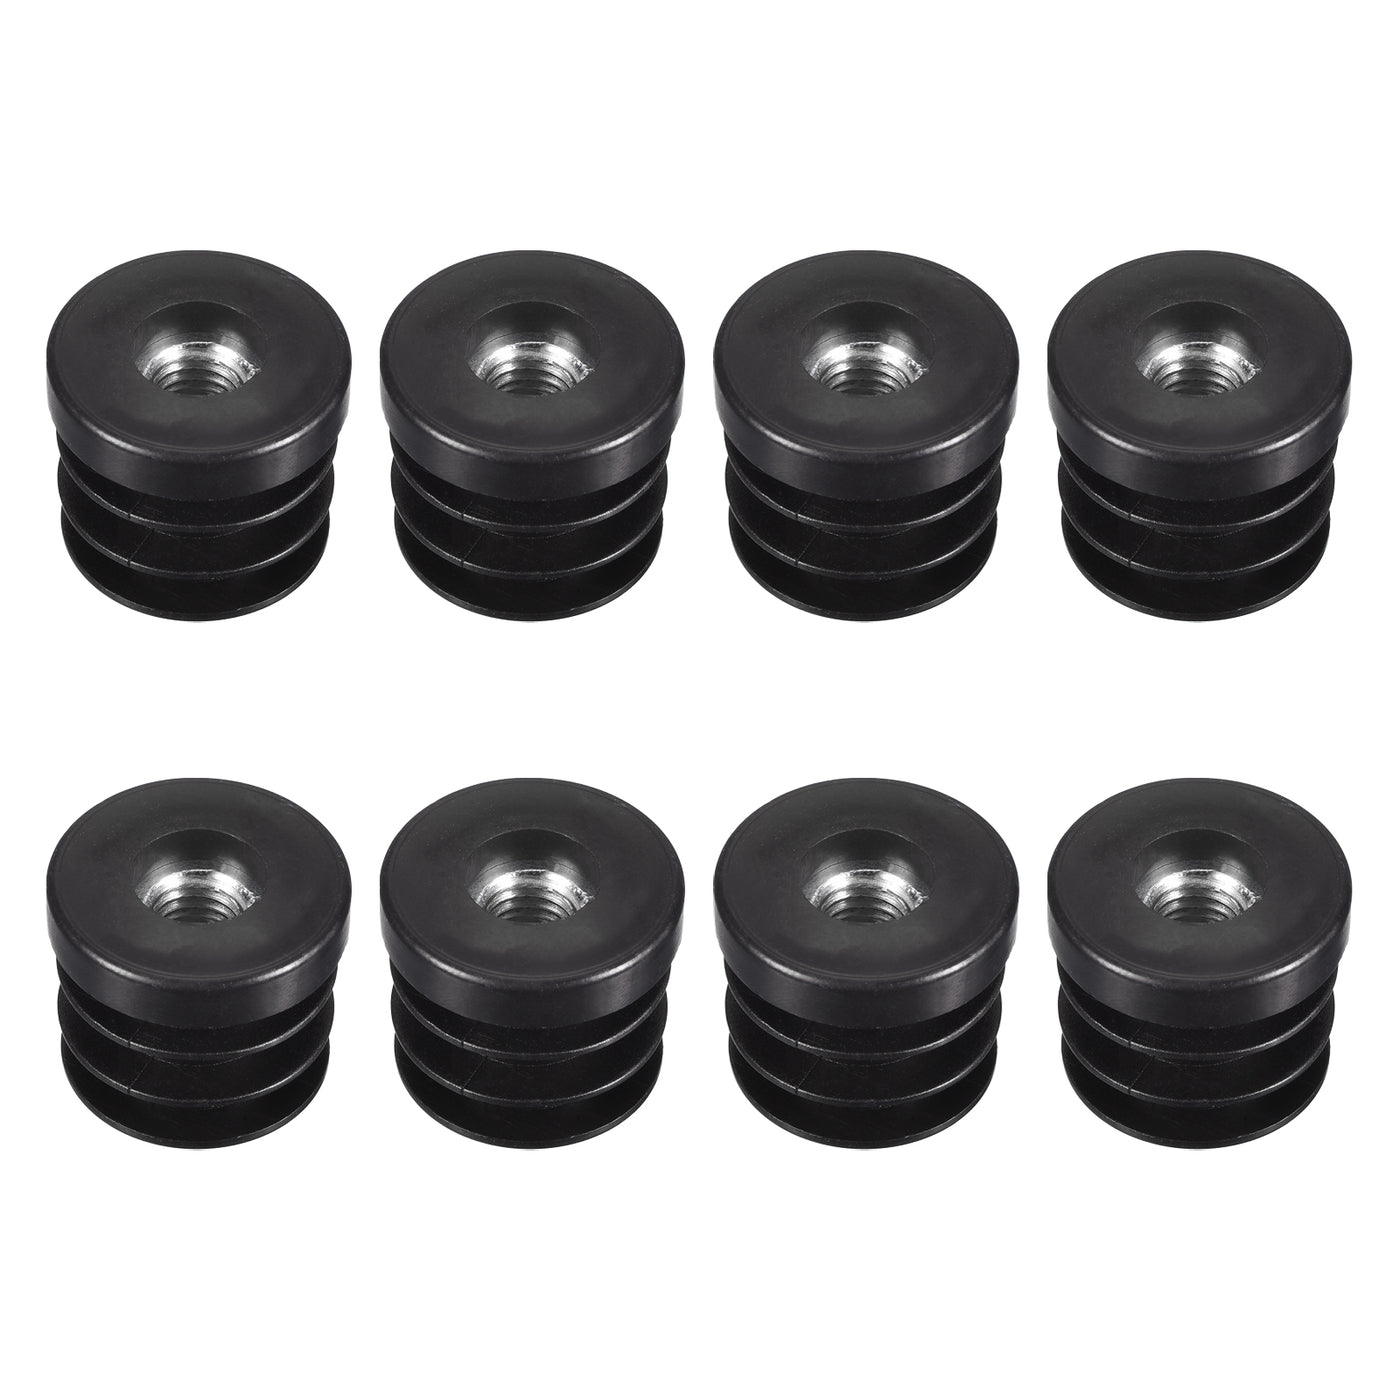 uxcell Uxcell 8Pcs 30mm/1.18" Caster Insert with Thread, Round M10 Thread for Furniture